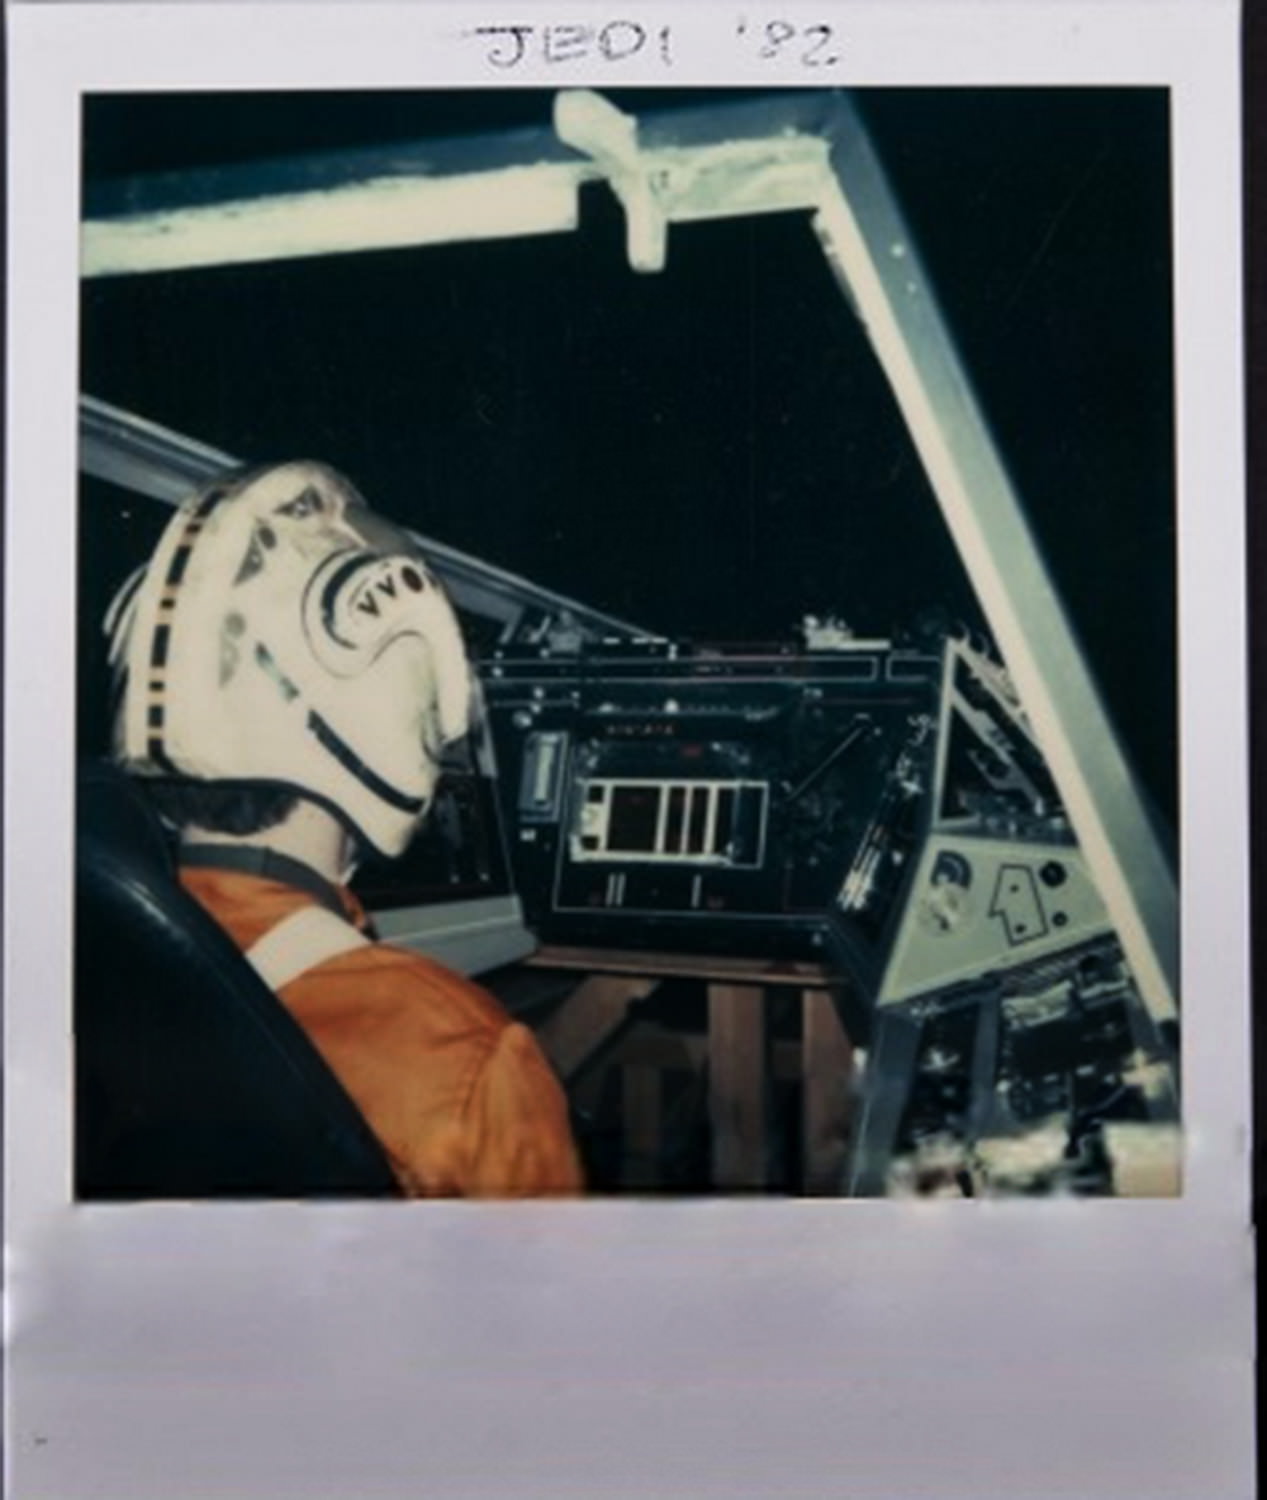 X-wing fighter continuity shot.